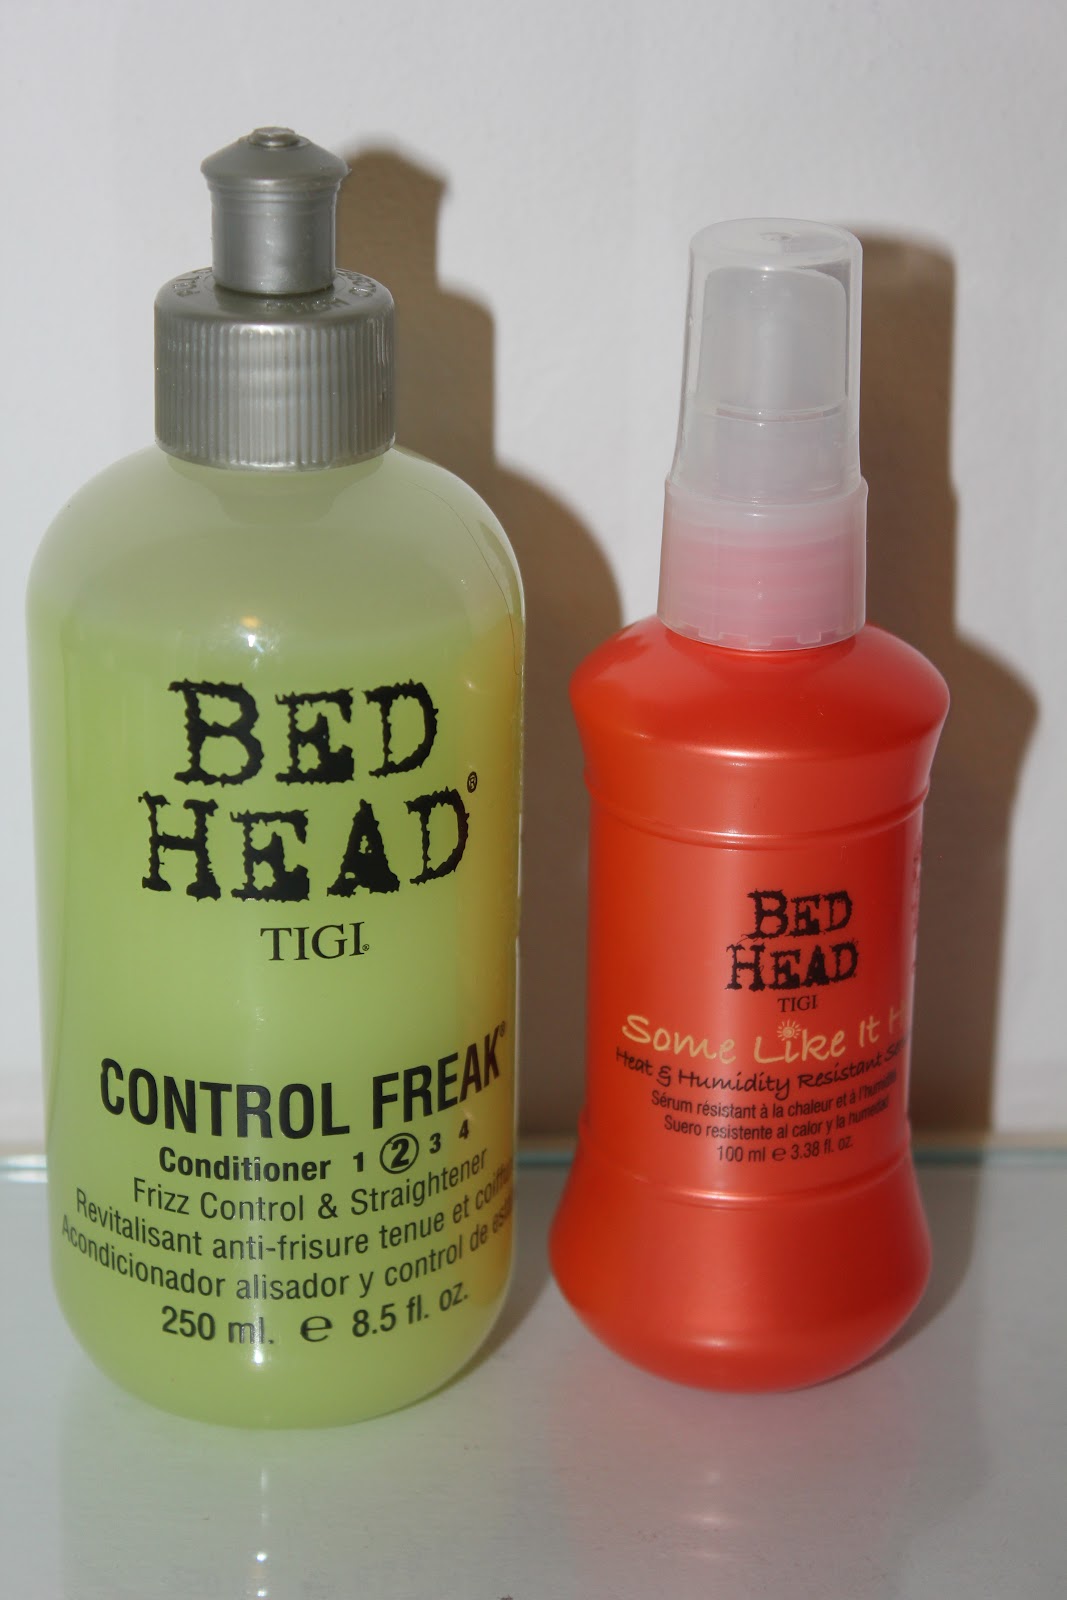 Review: Tigi Bed Head Some Like it Hot and Control Freak Conditioner